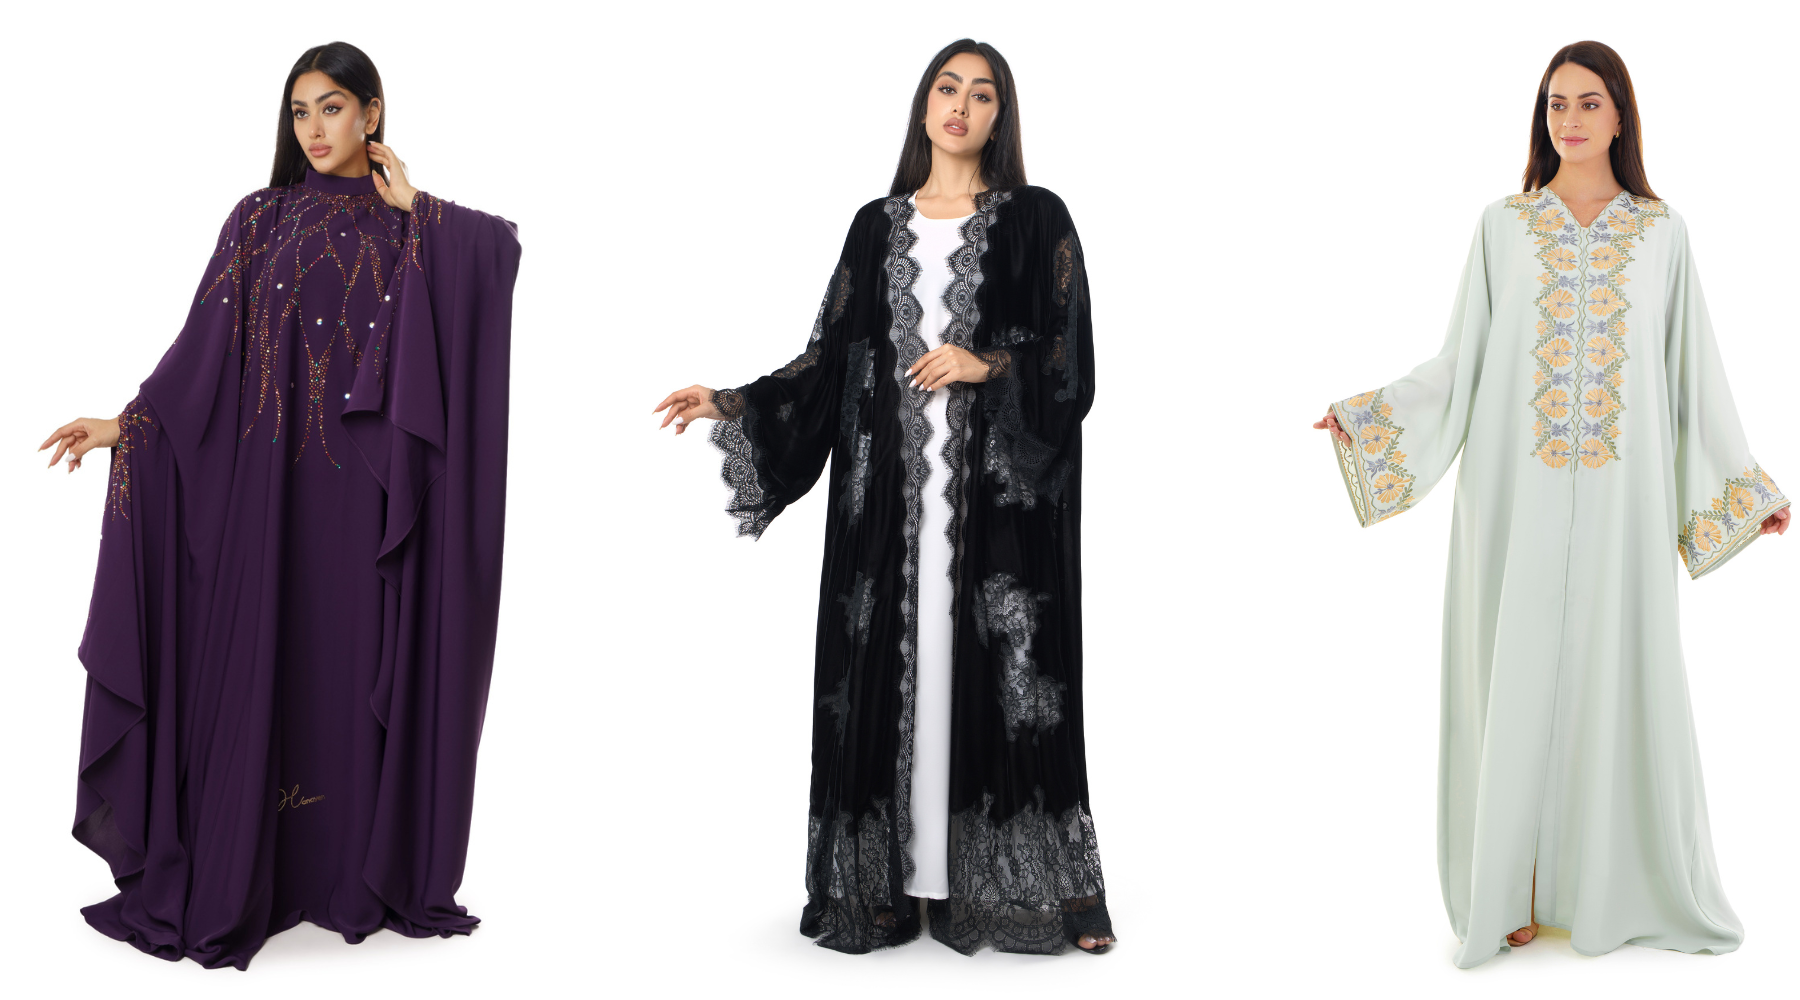 The Evolution of Abaya Fashion and the Rise of Modest Wear